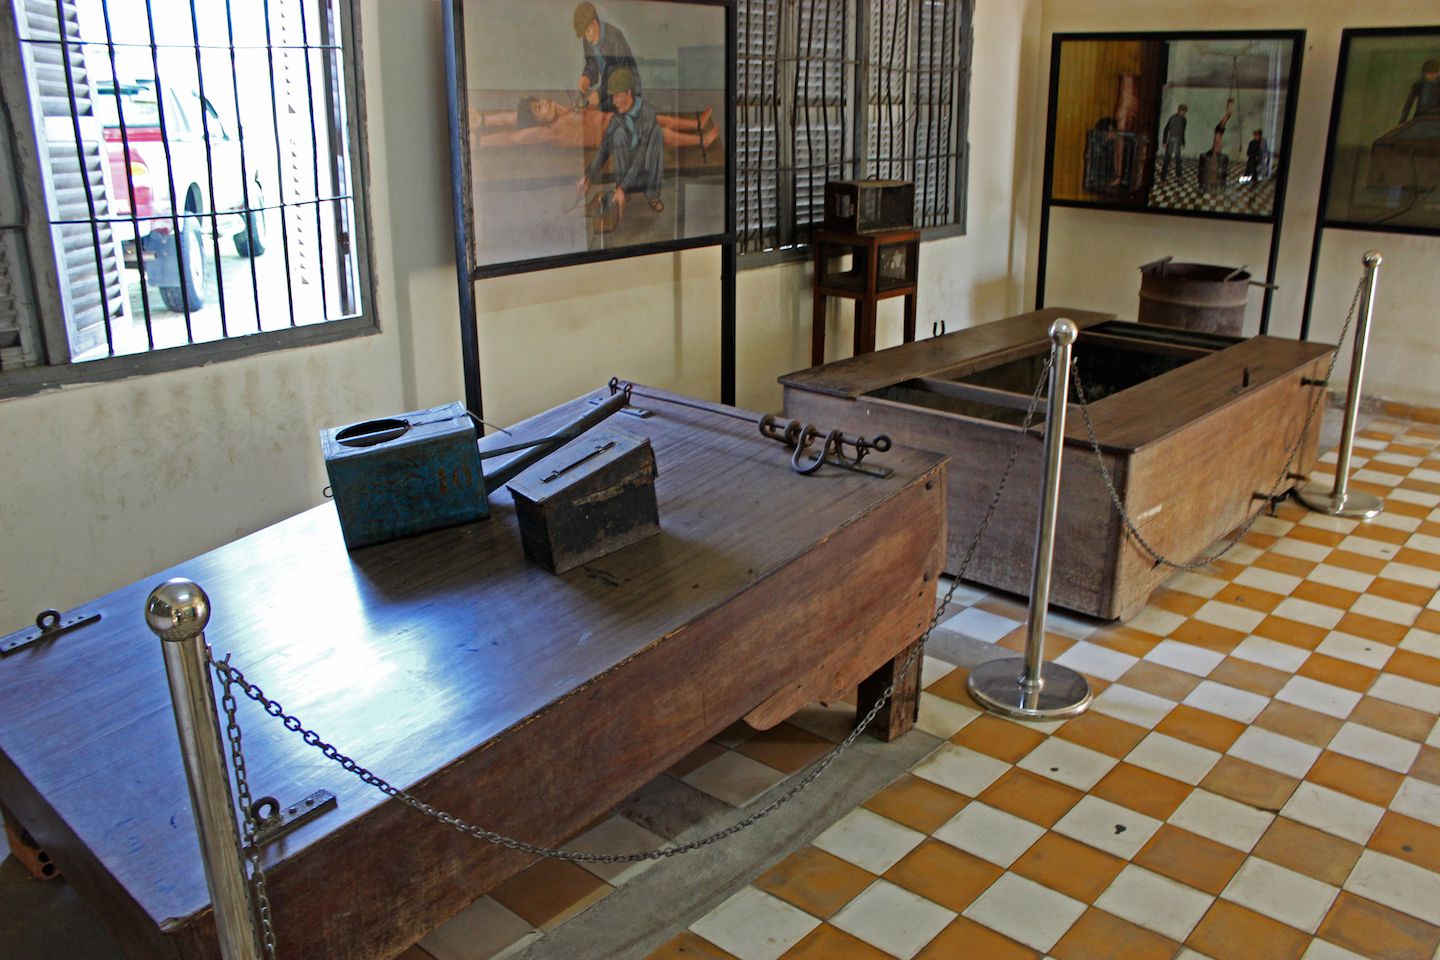 Torture devices at S-21